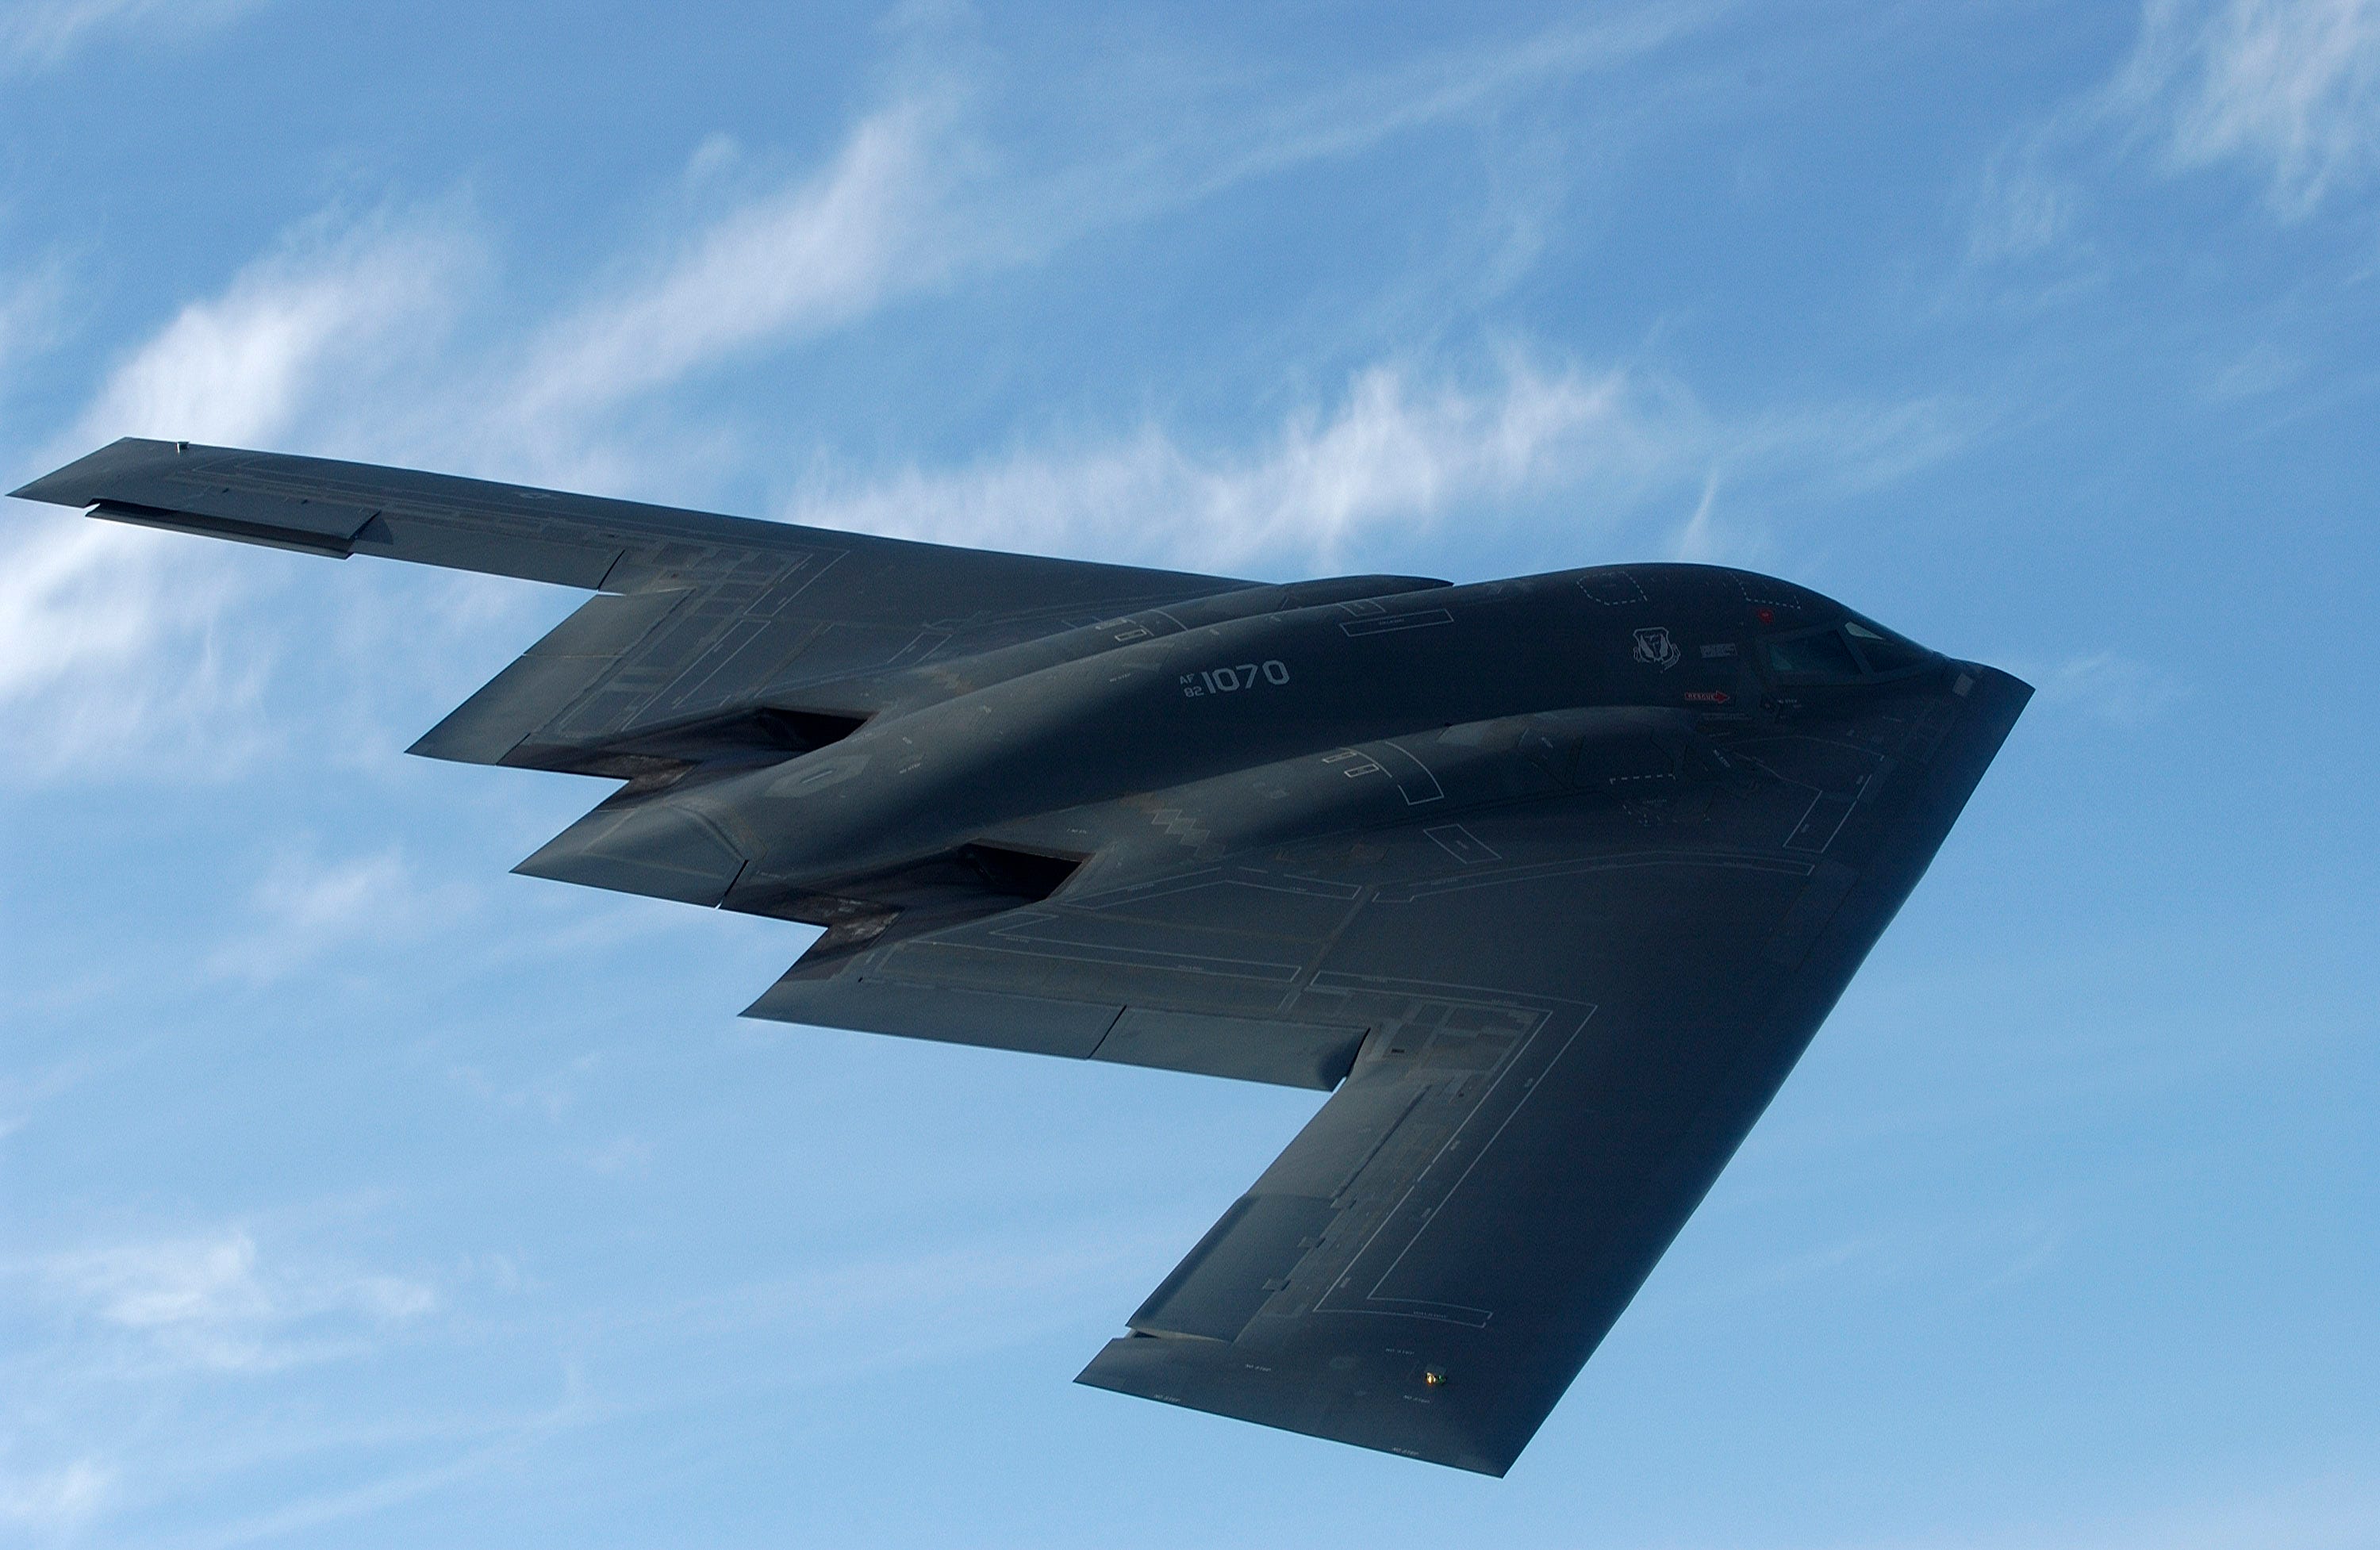 Why The B-2 Is Such a Badass Plane